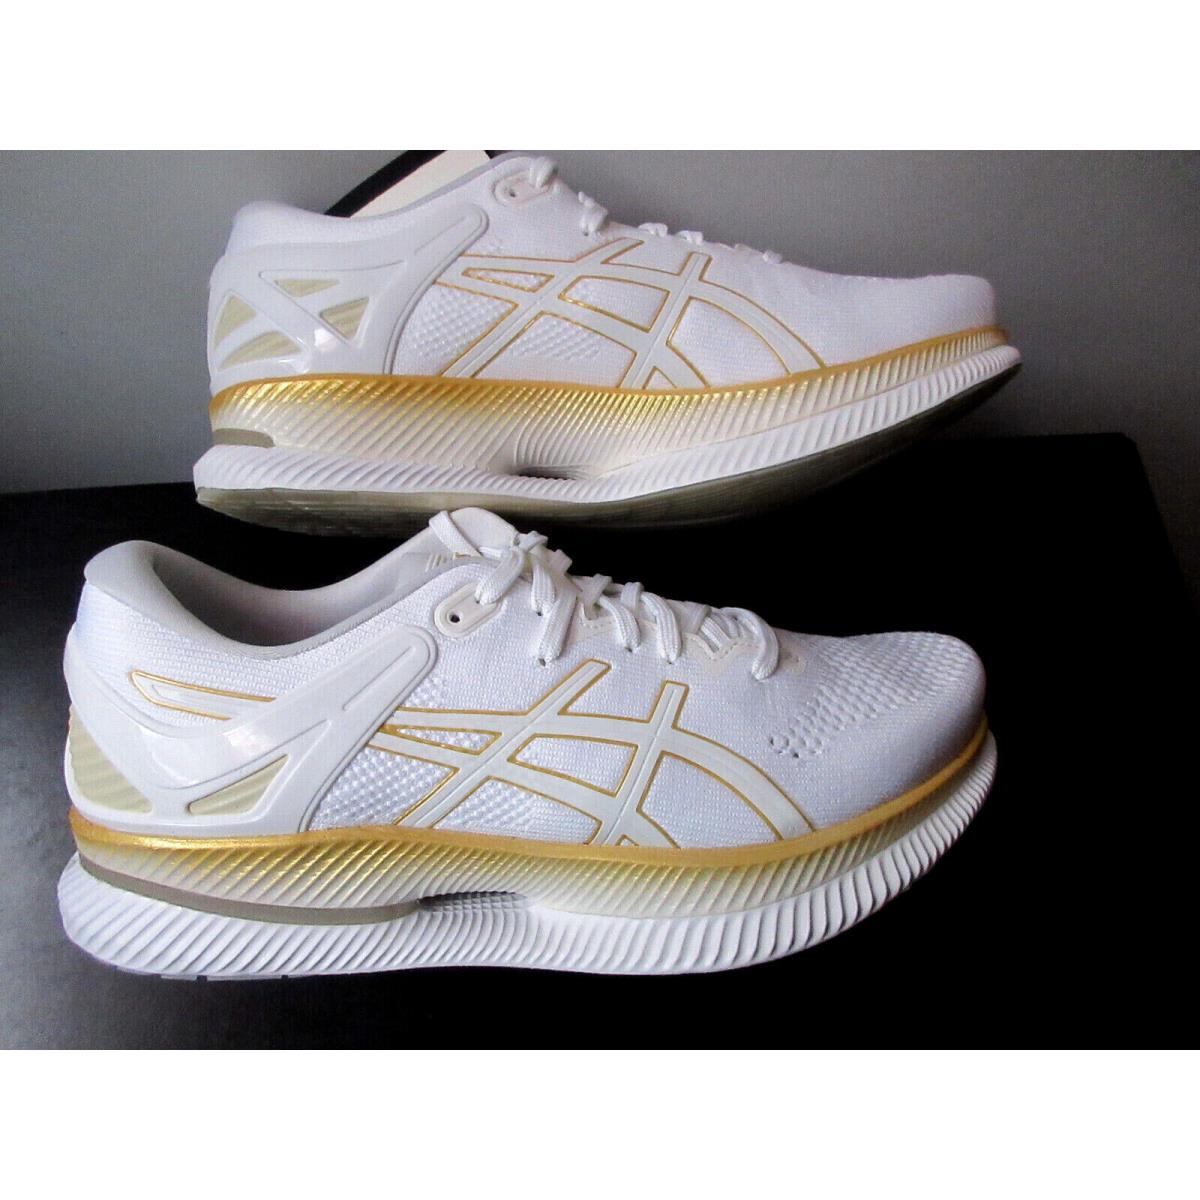 10 Asics Metaride 1011A142 100 White Pure Gold Running Shoes Sneakers SZ 10